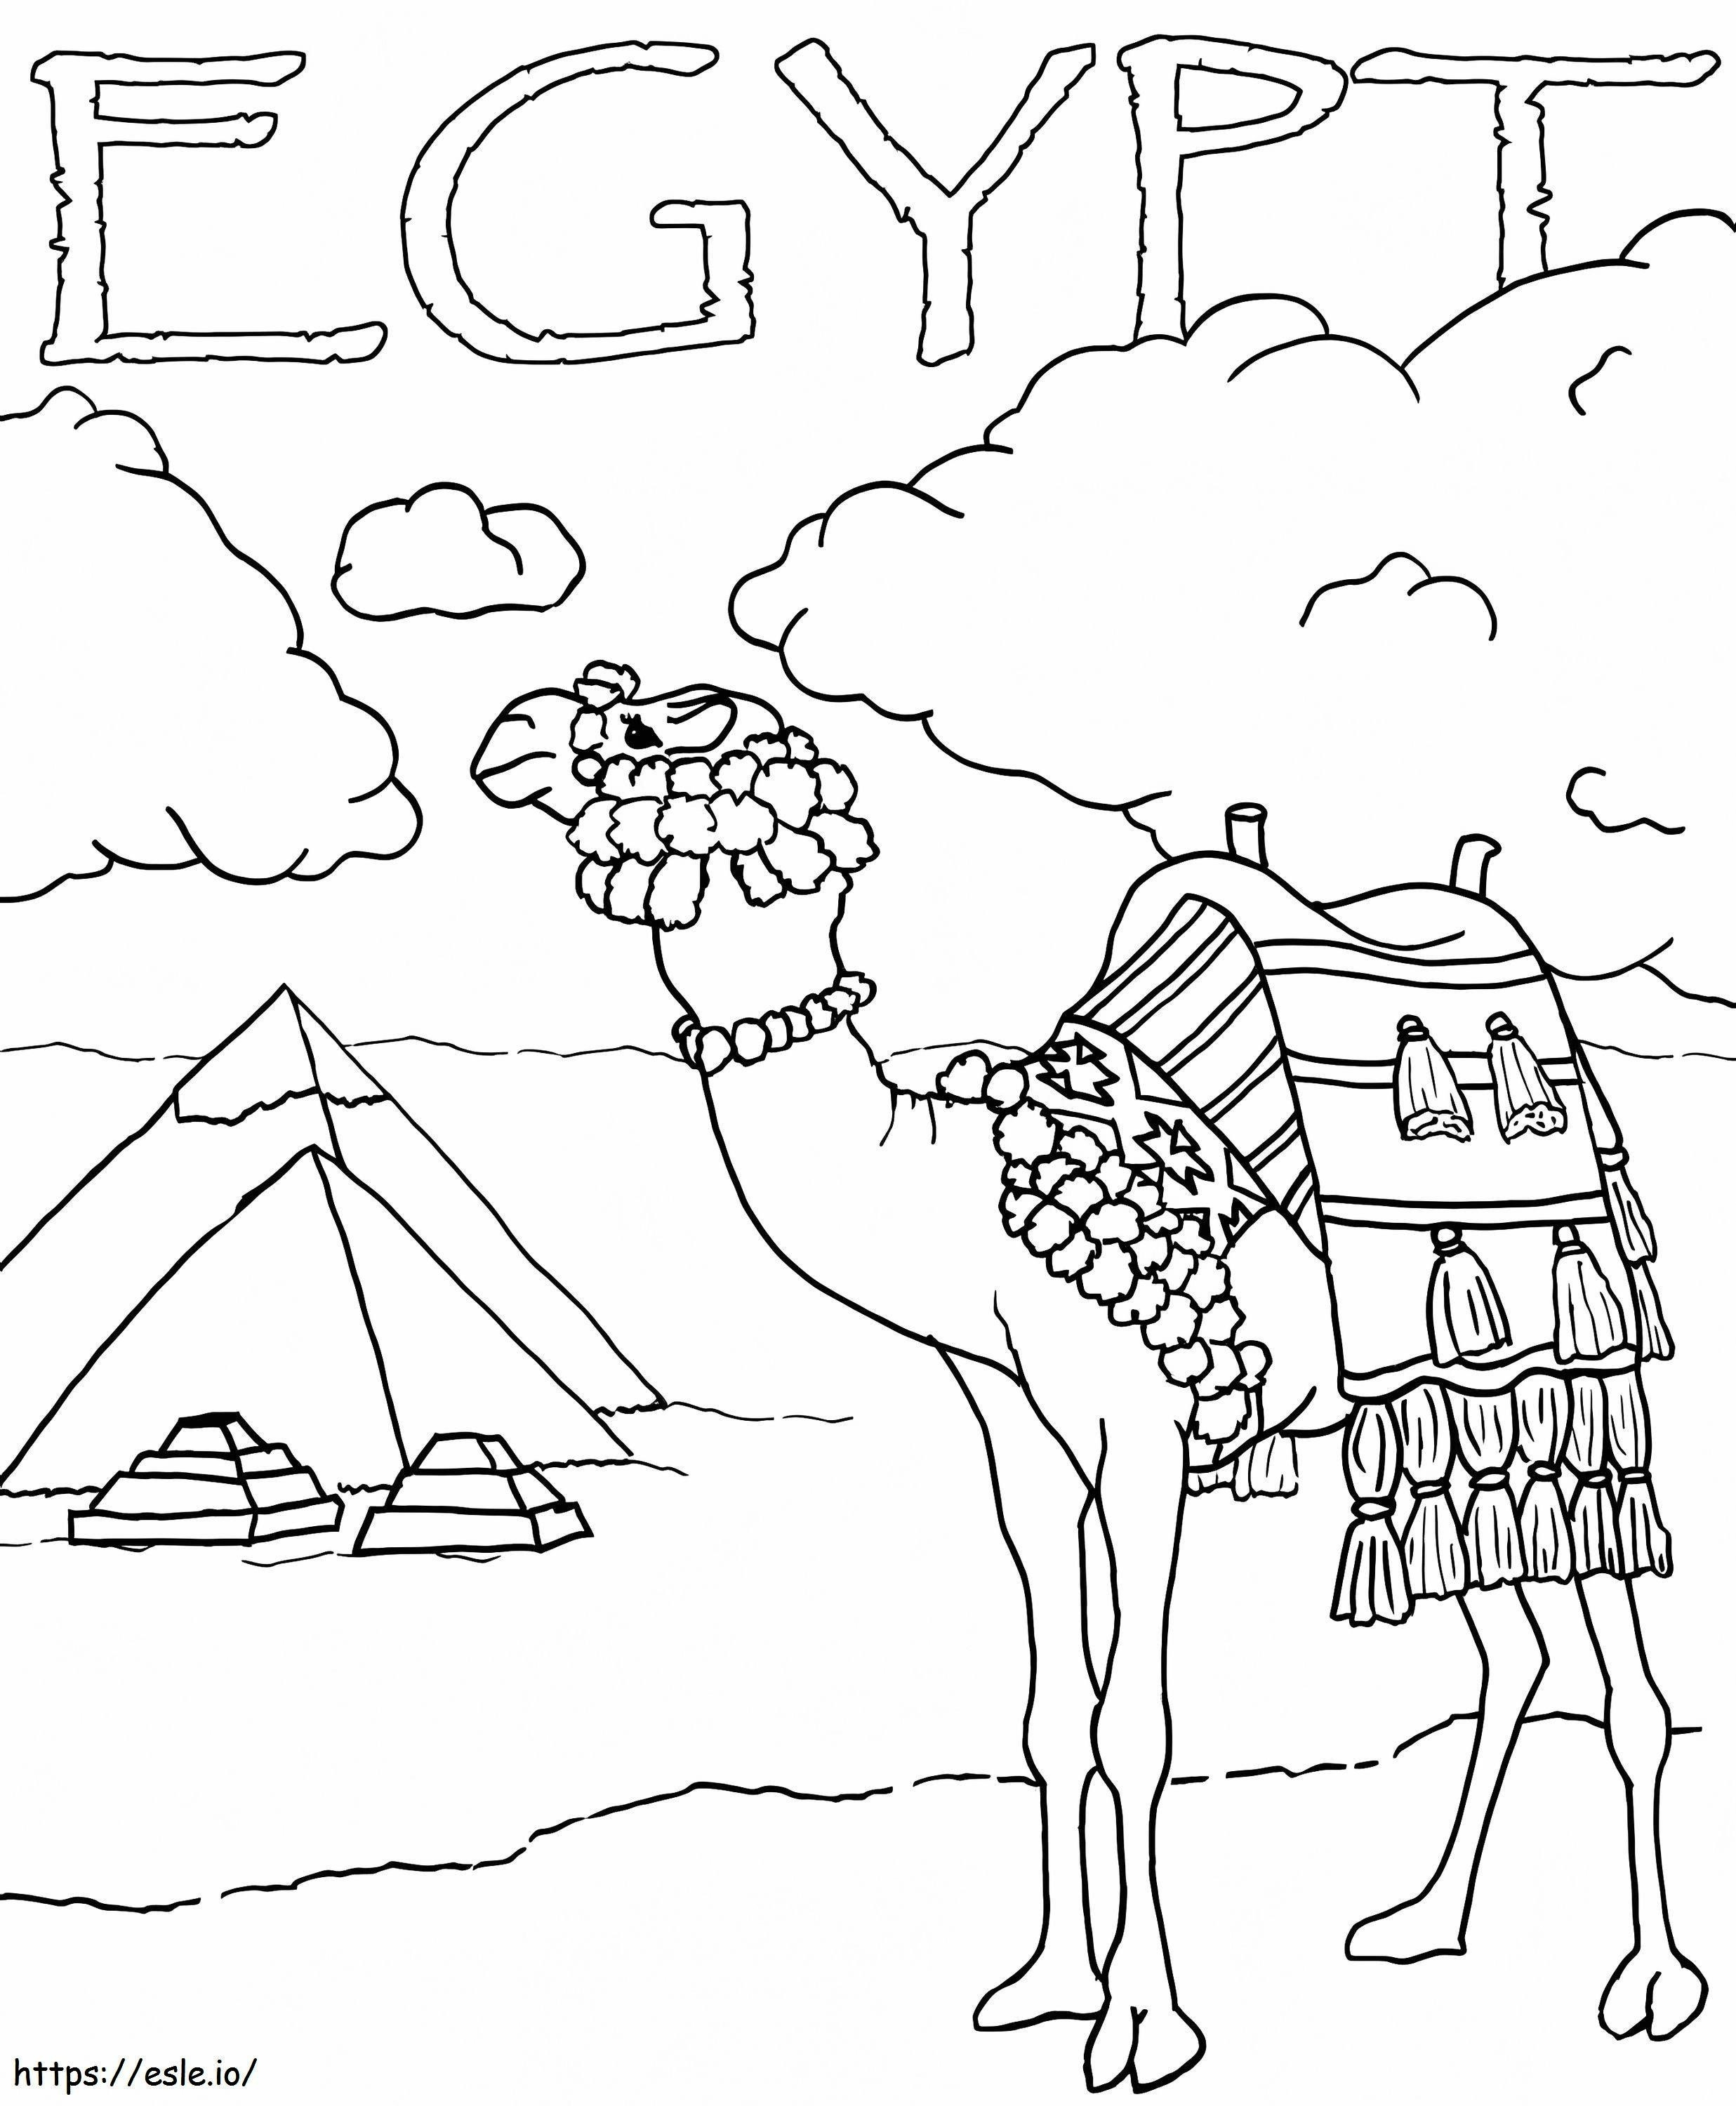 Egypt 2 coloring page